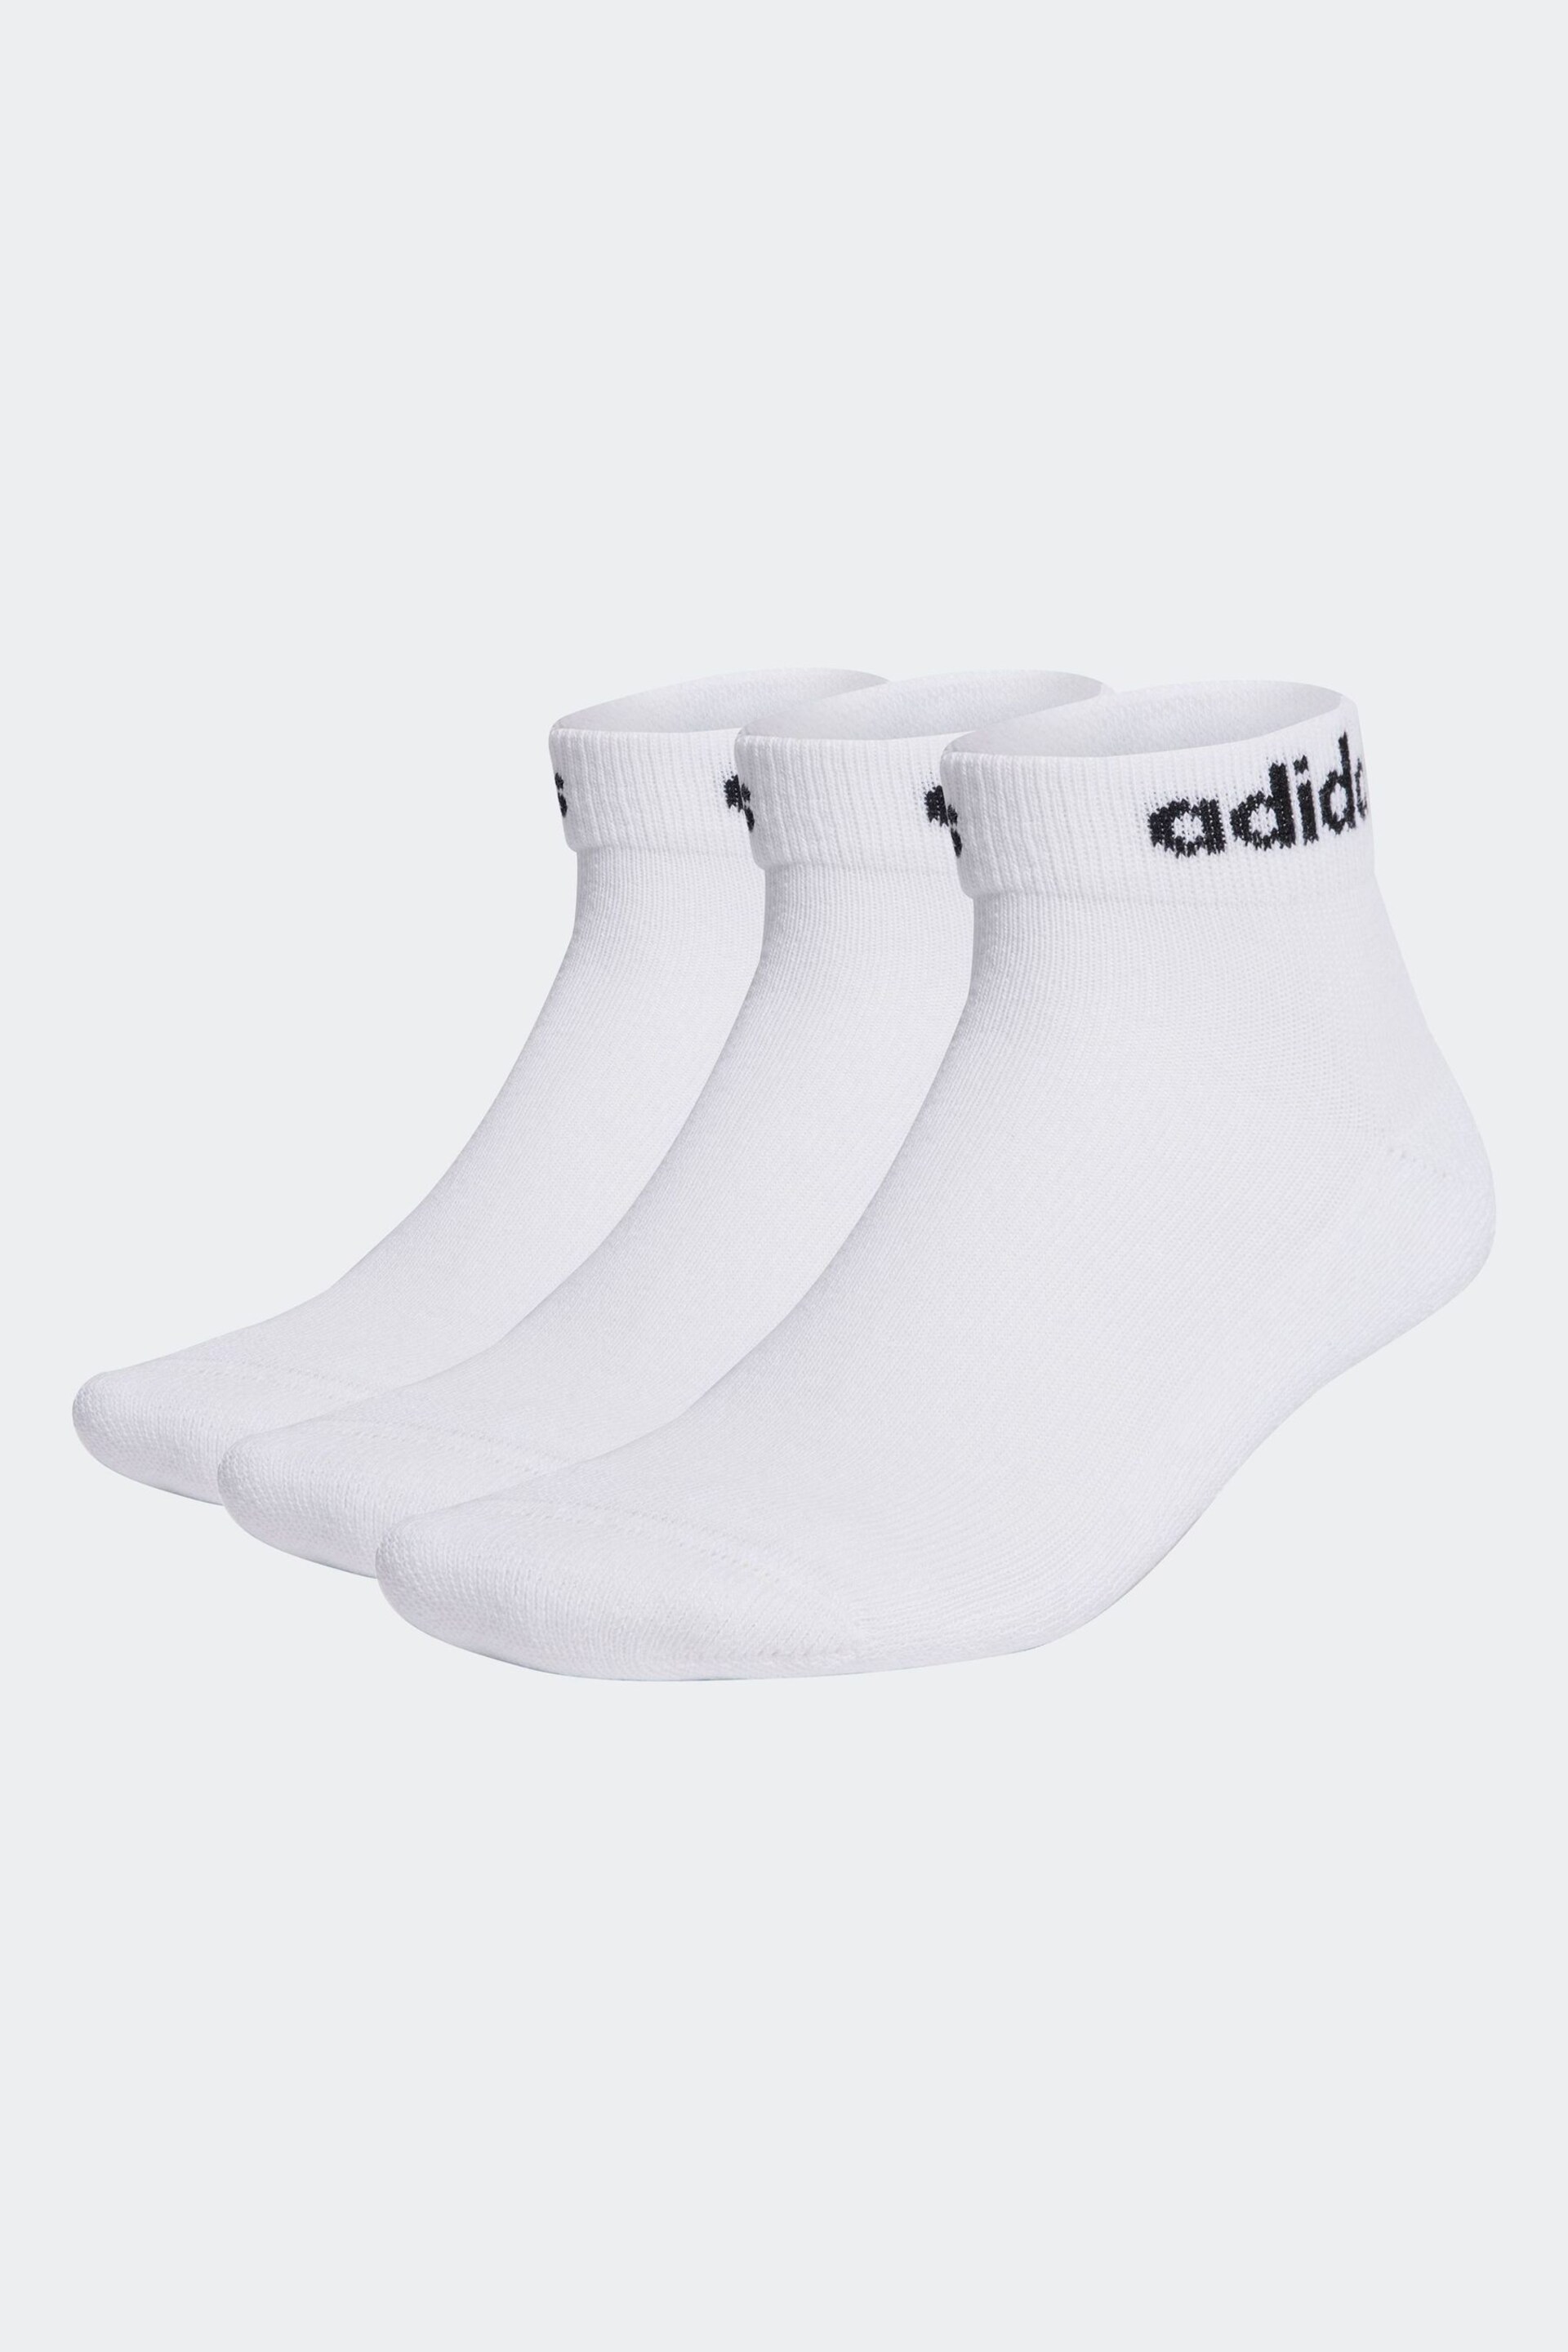 adidas White Linear Ankle Cushioned Socks 3 Pairs - Image 1 of 1